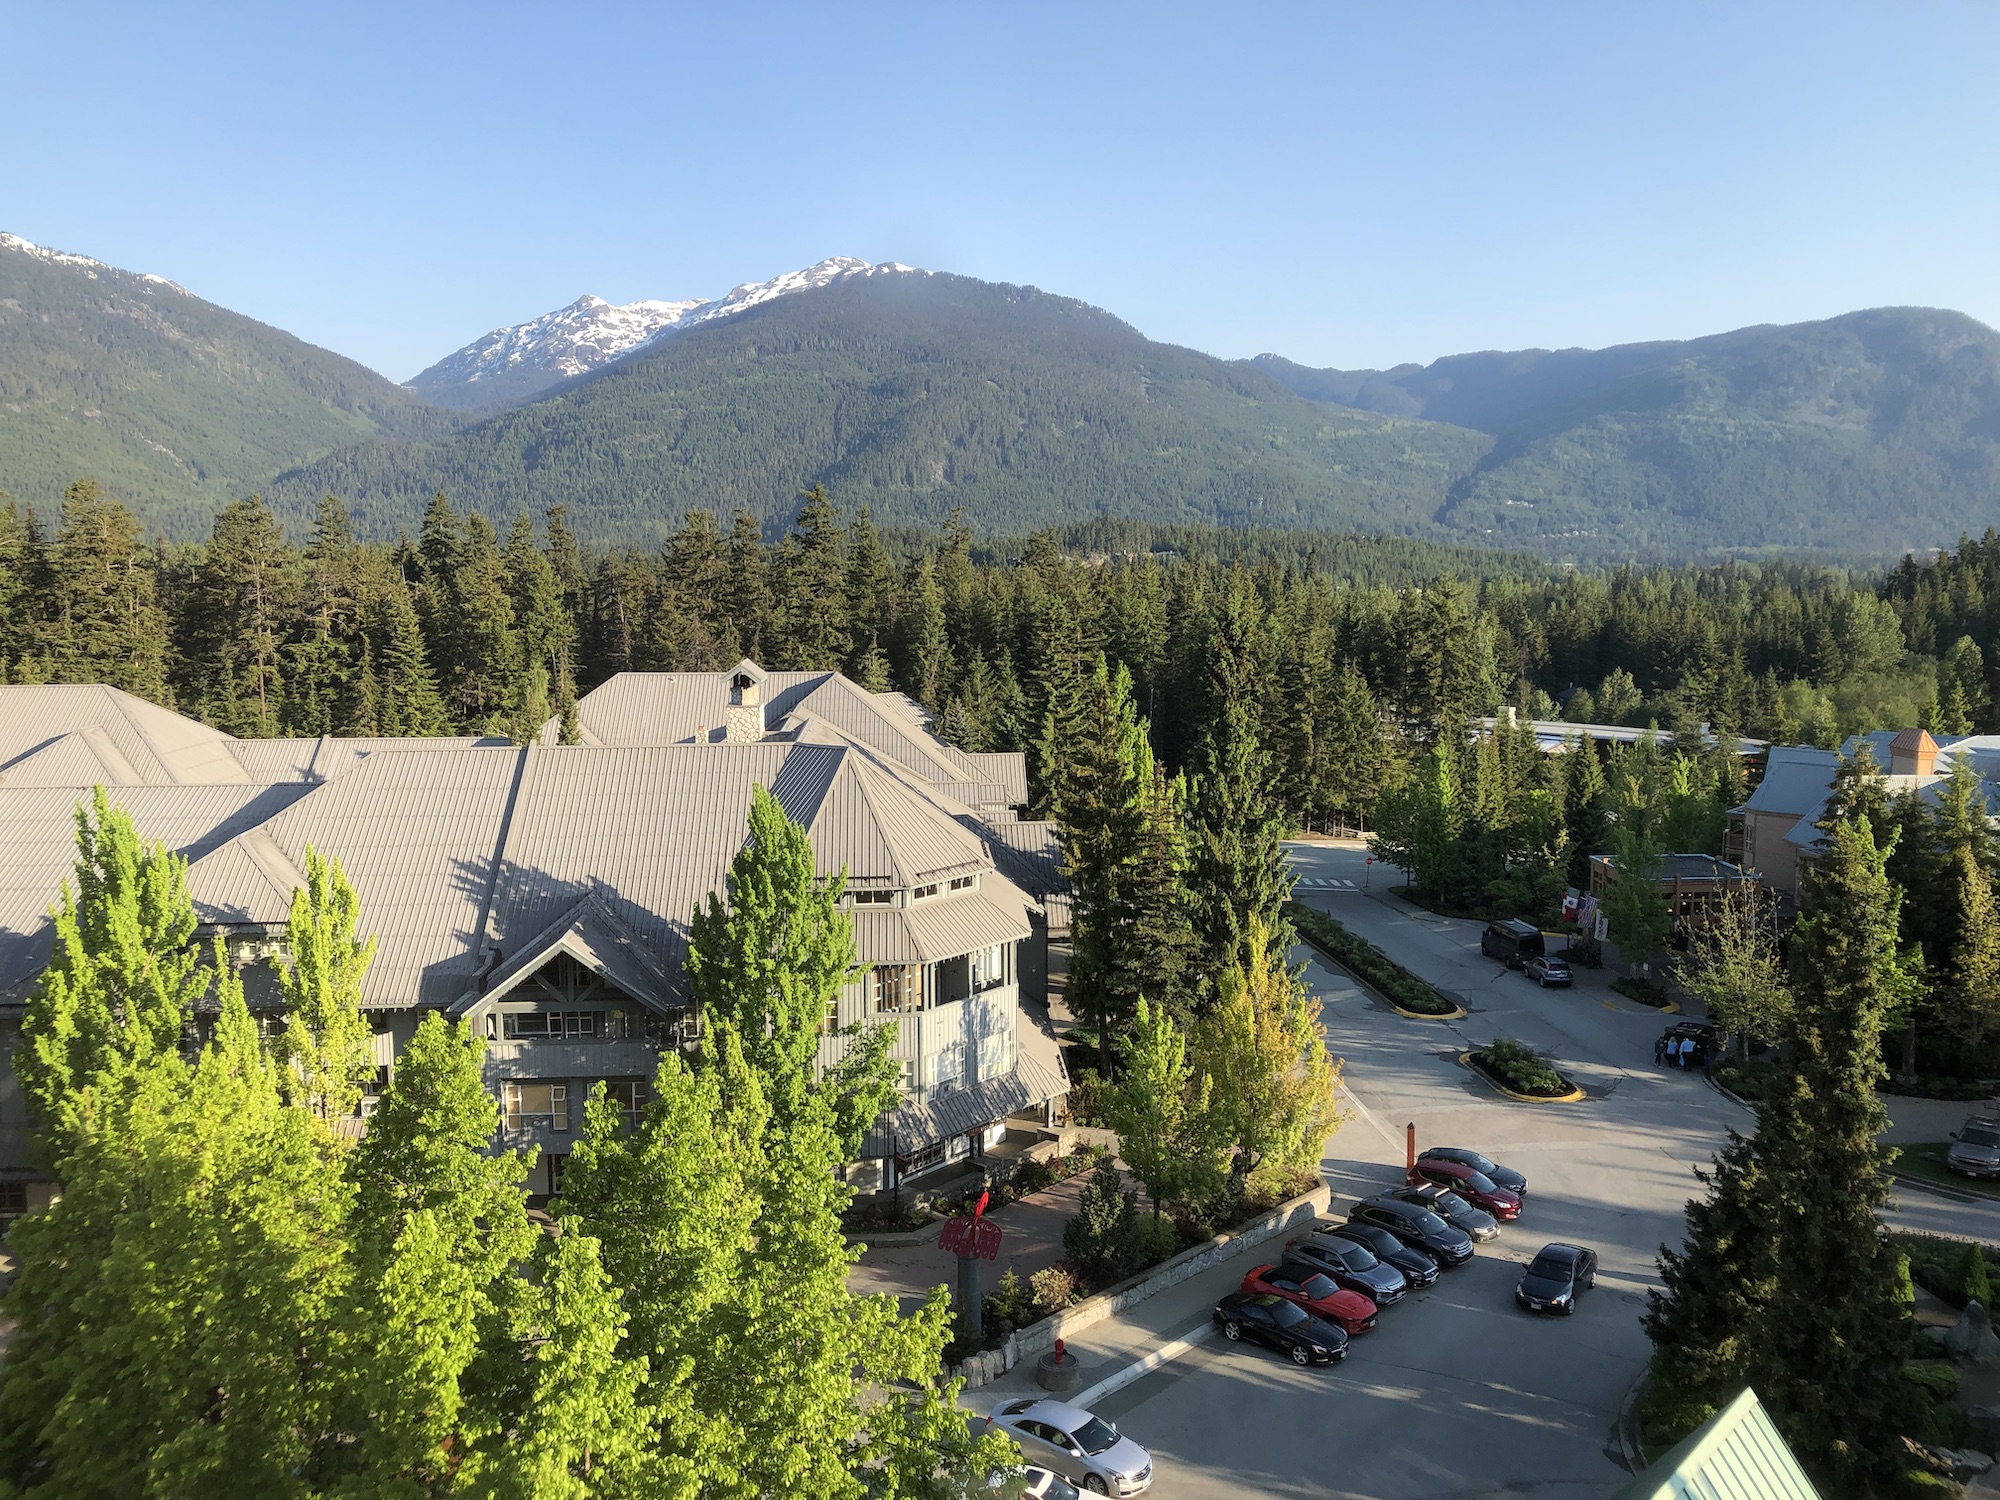 Whistler 2020 conference Title Sponsor RFP closes September 27th